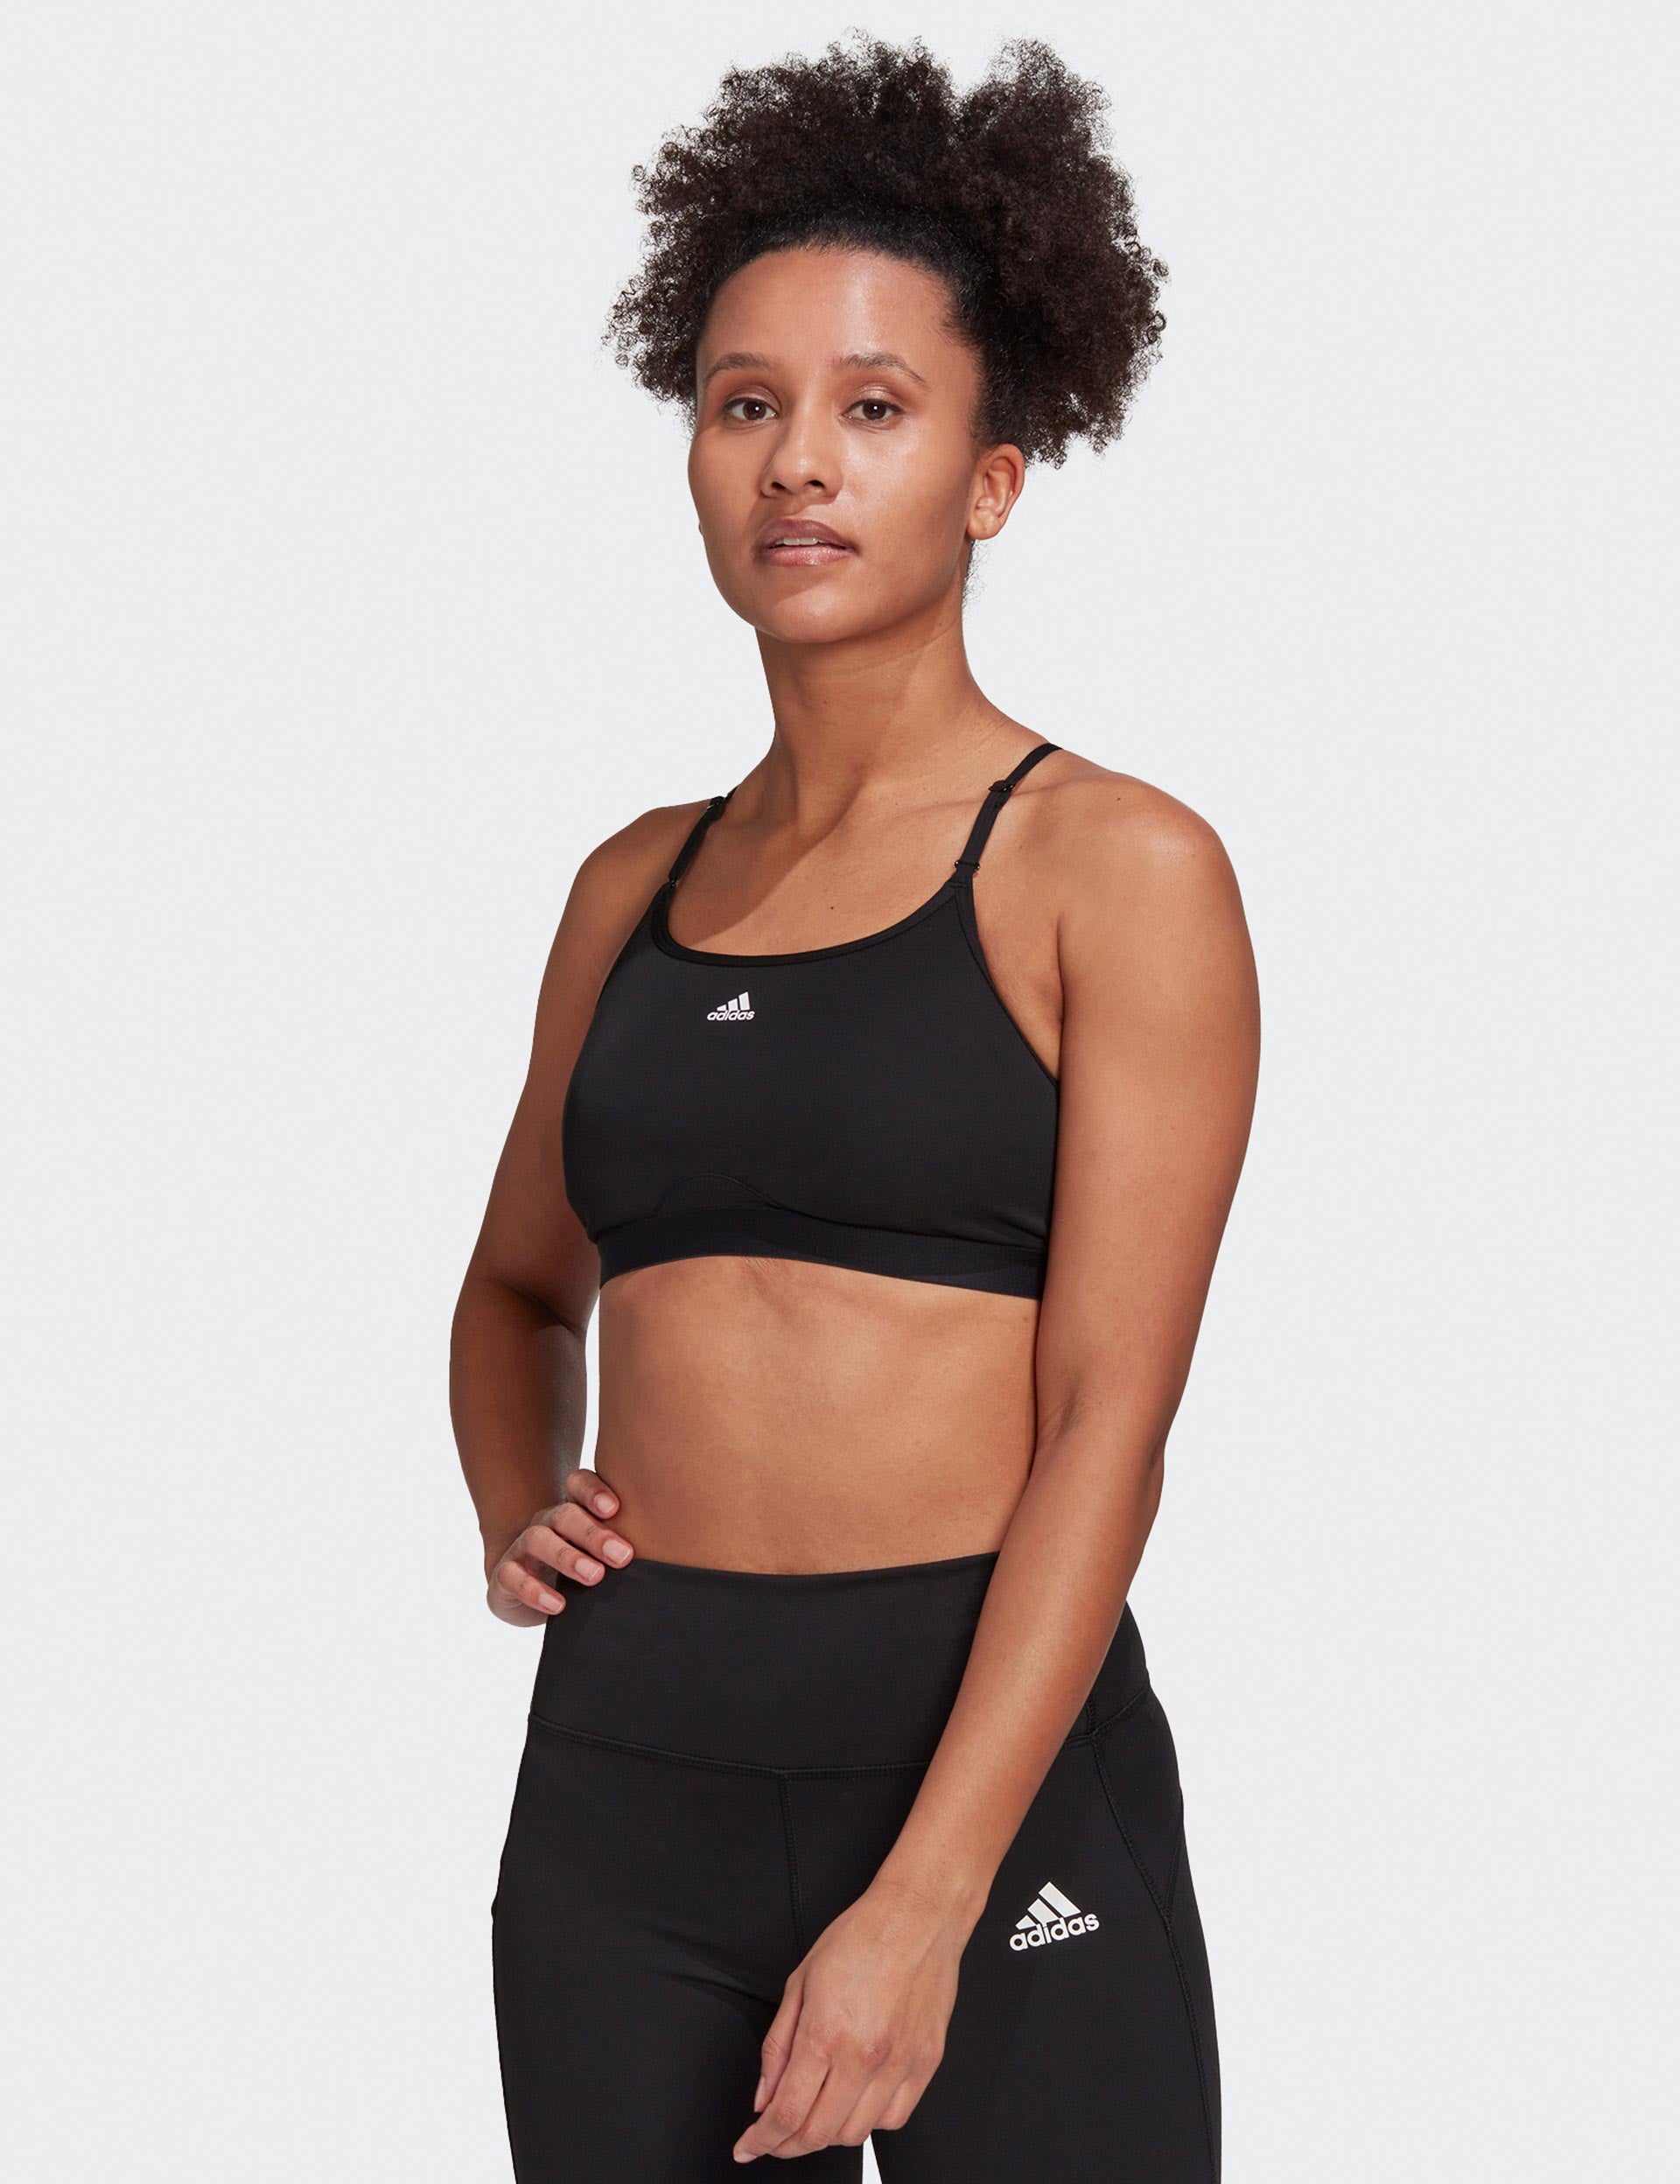 Buy Adidas Aeroreact Training Light-Support Floral Print Sport bra (HZ1530)  black from £33.00 (Today) – Best Deals on